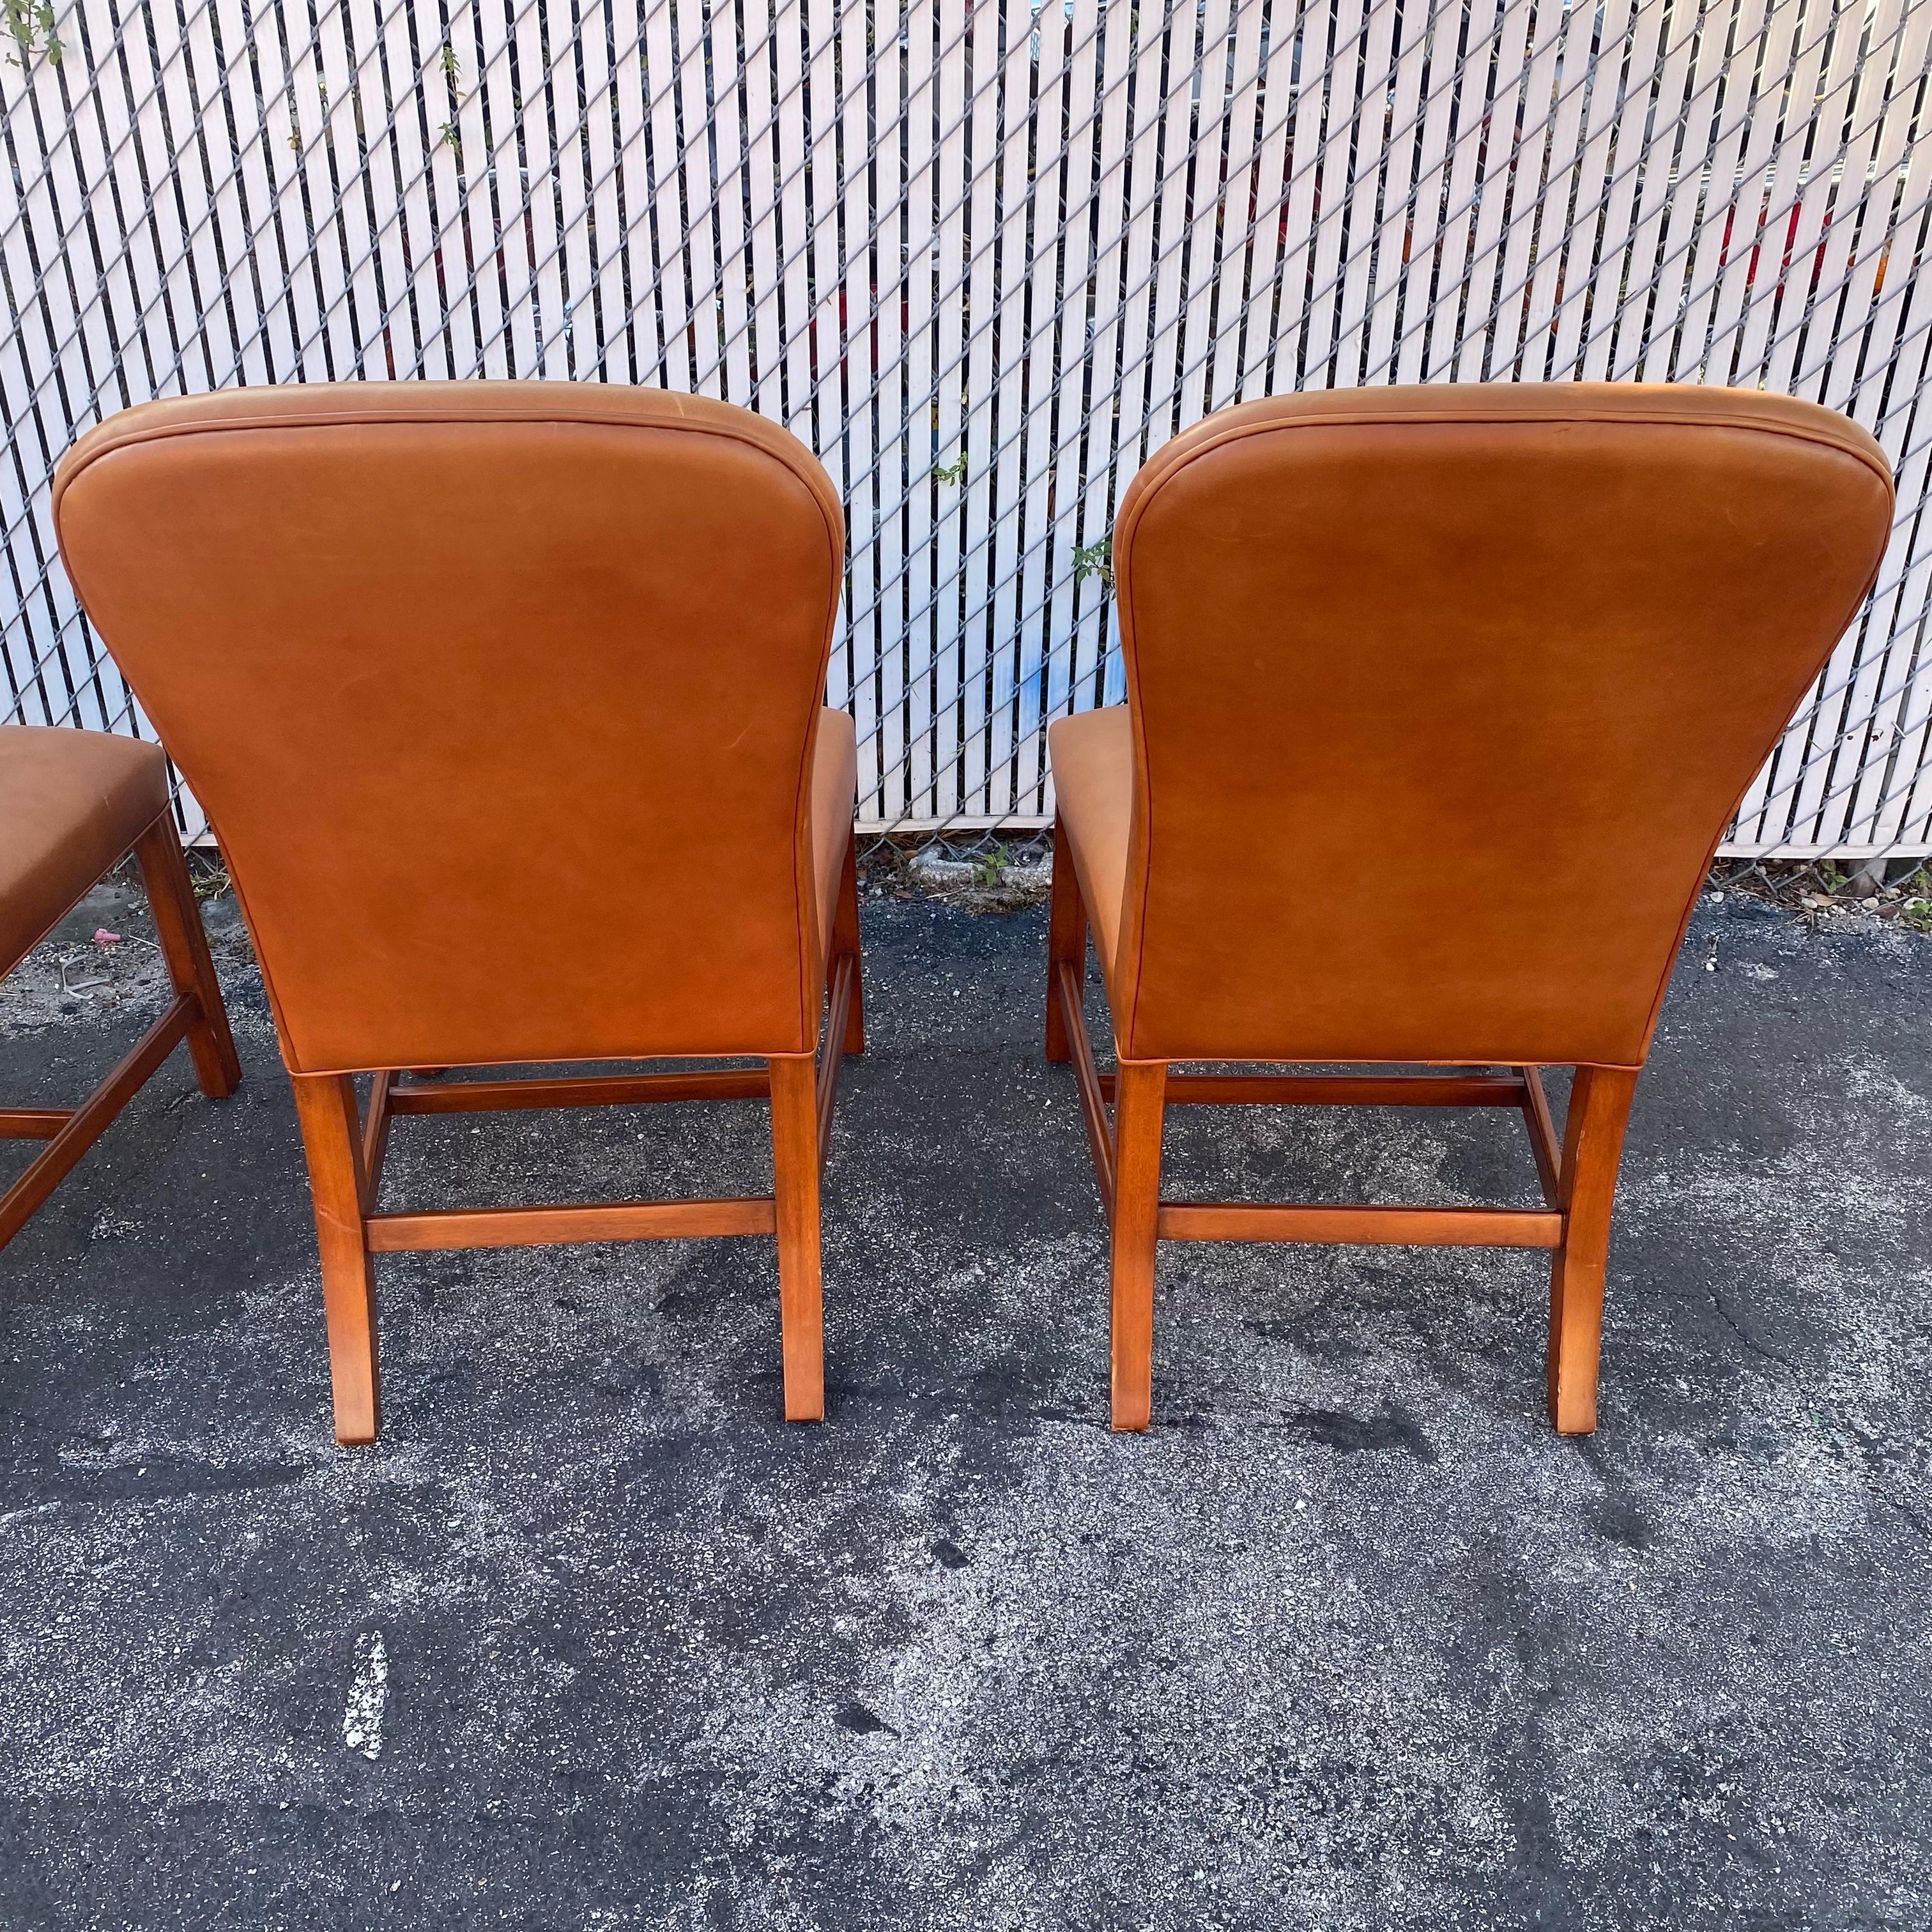 2000s Ralph Lauren Saddle Leather Dining Chairs, Set of 4 For Sale 6